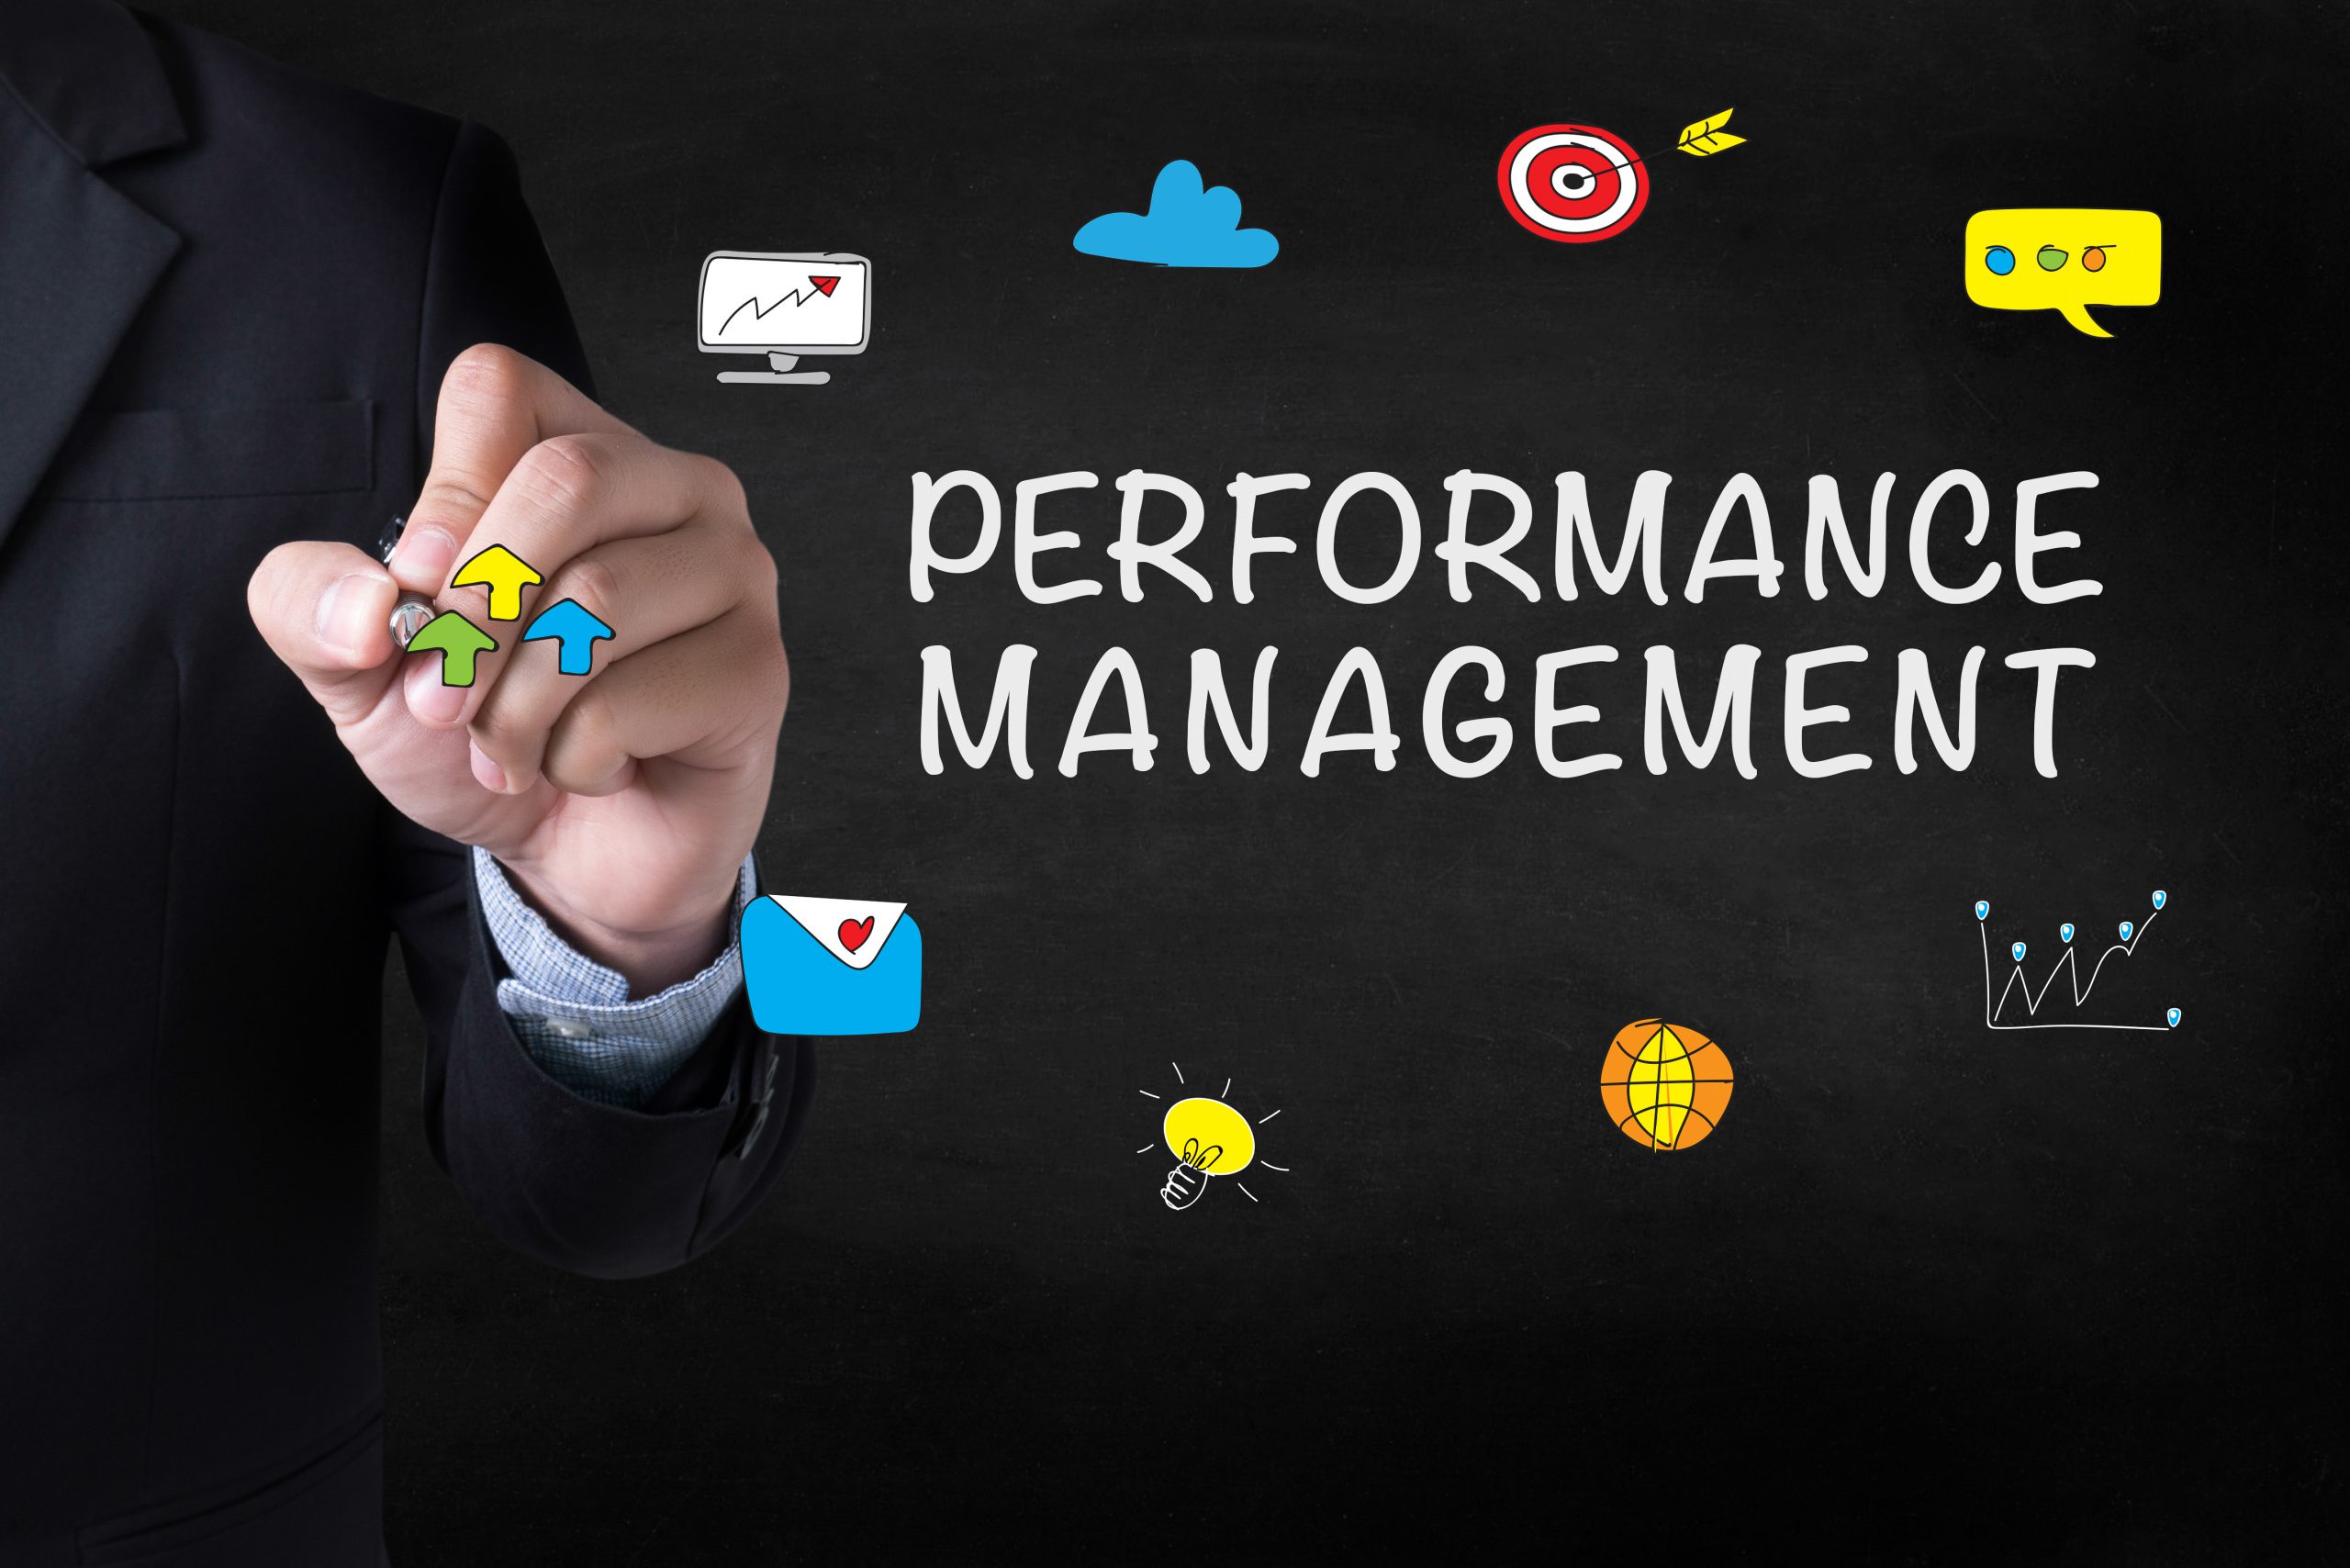 Performance Appraisal System – An Important Part of Performance Management